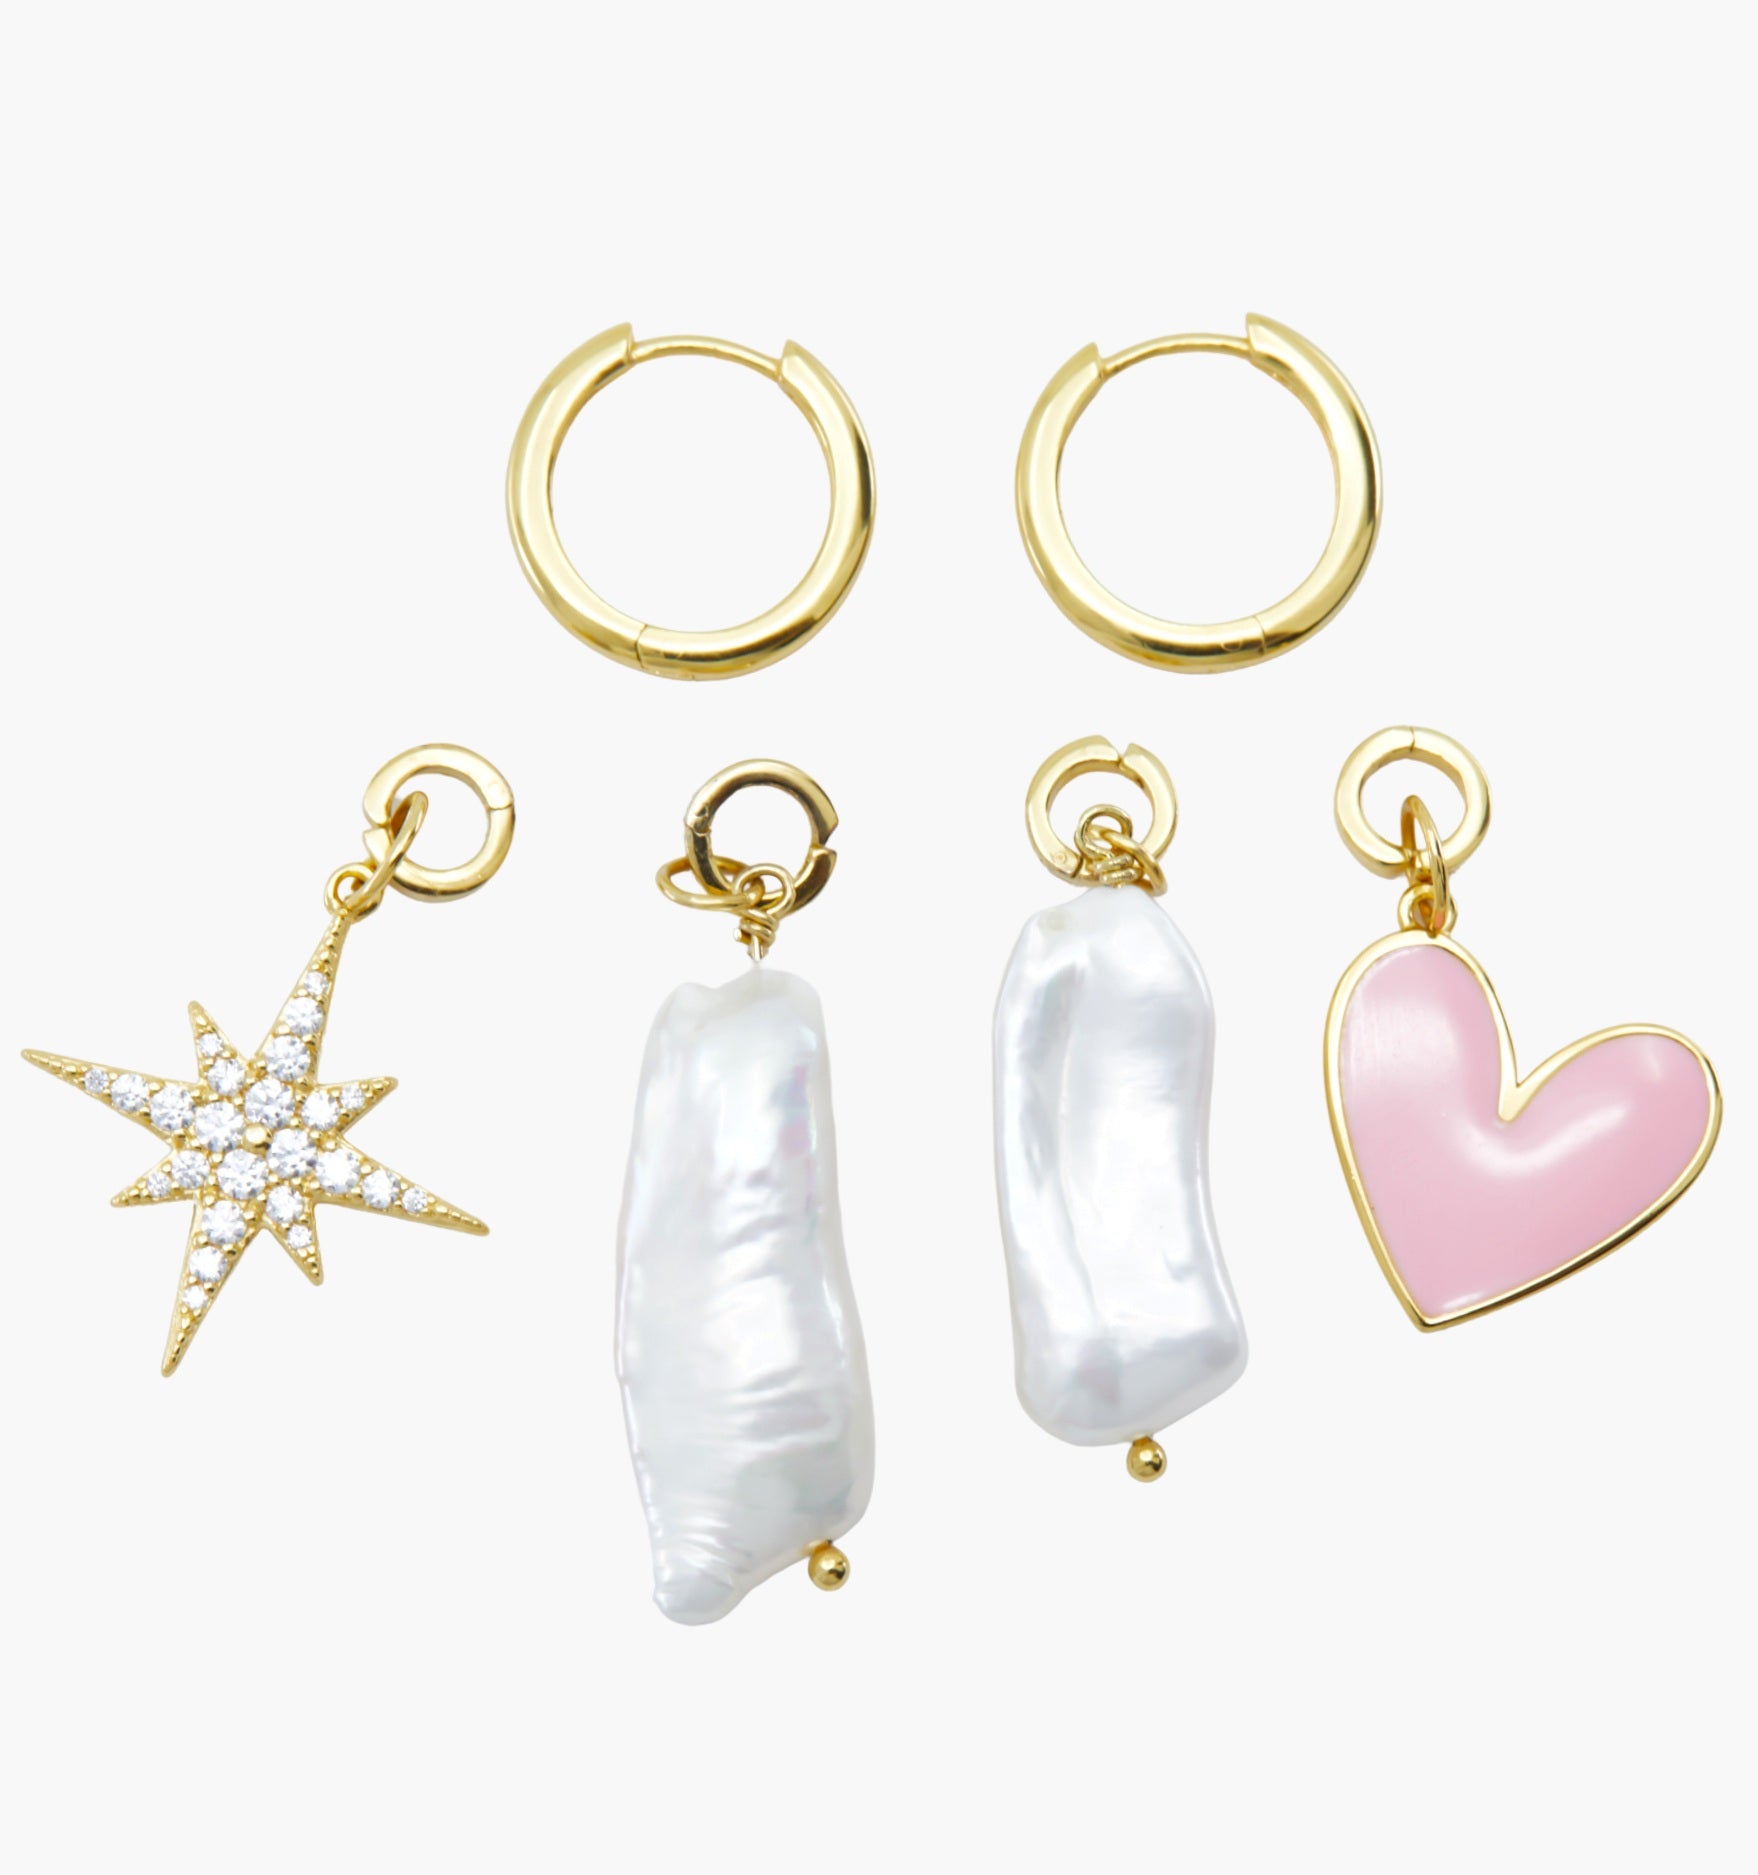 Small Hoops & Charms Set - Pink